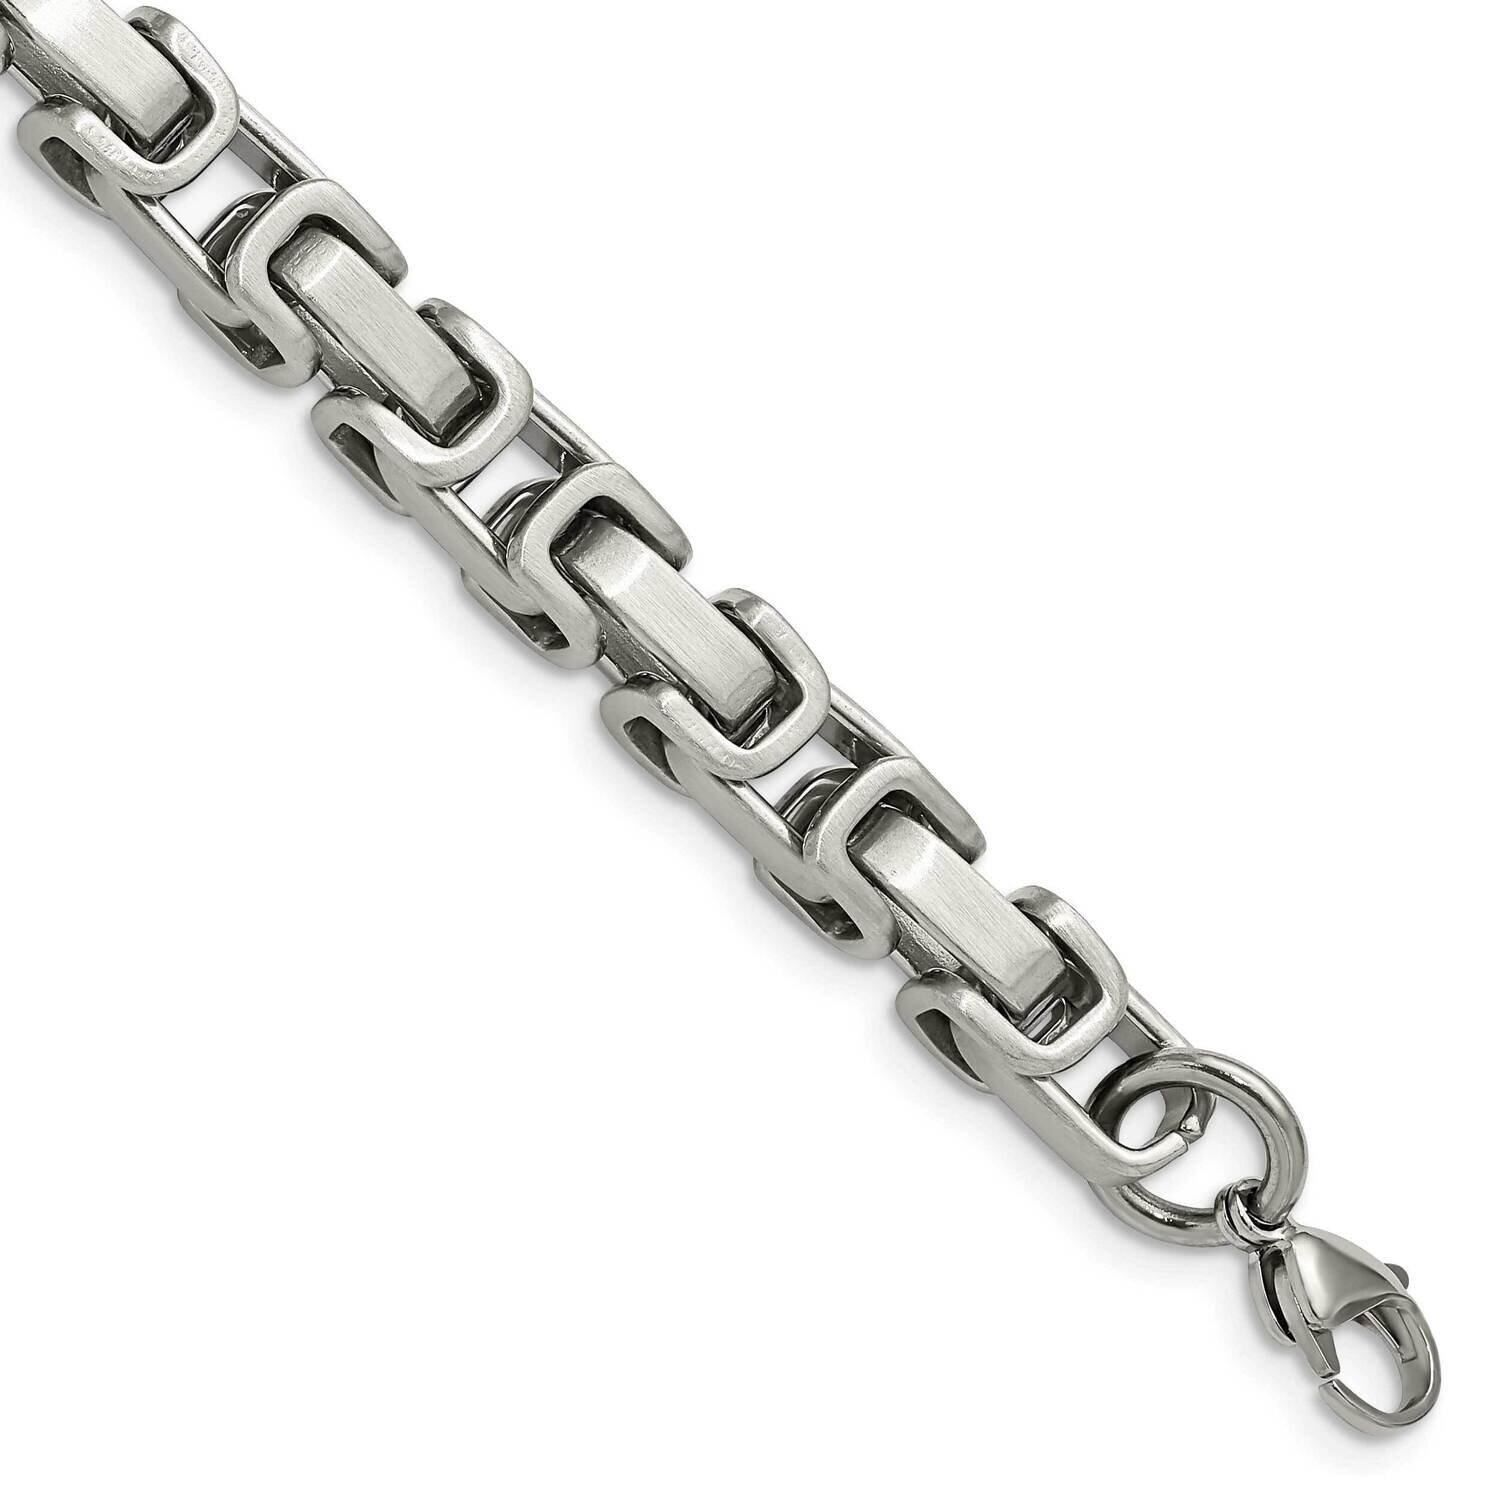 8.5 Inch Bracelet Stainless Steel Brushed and Polished SRB2912-8.5